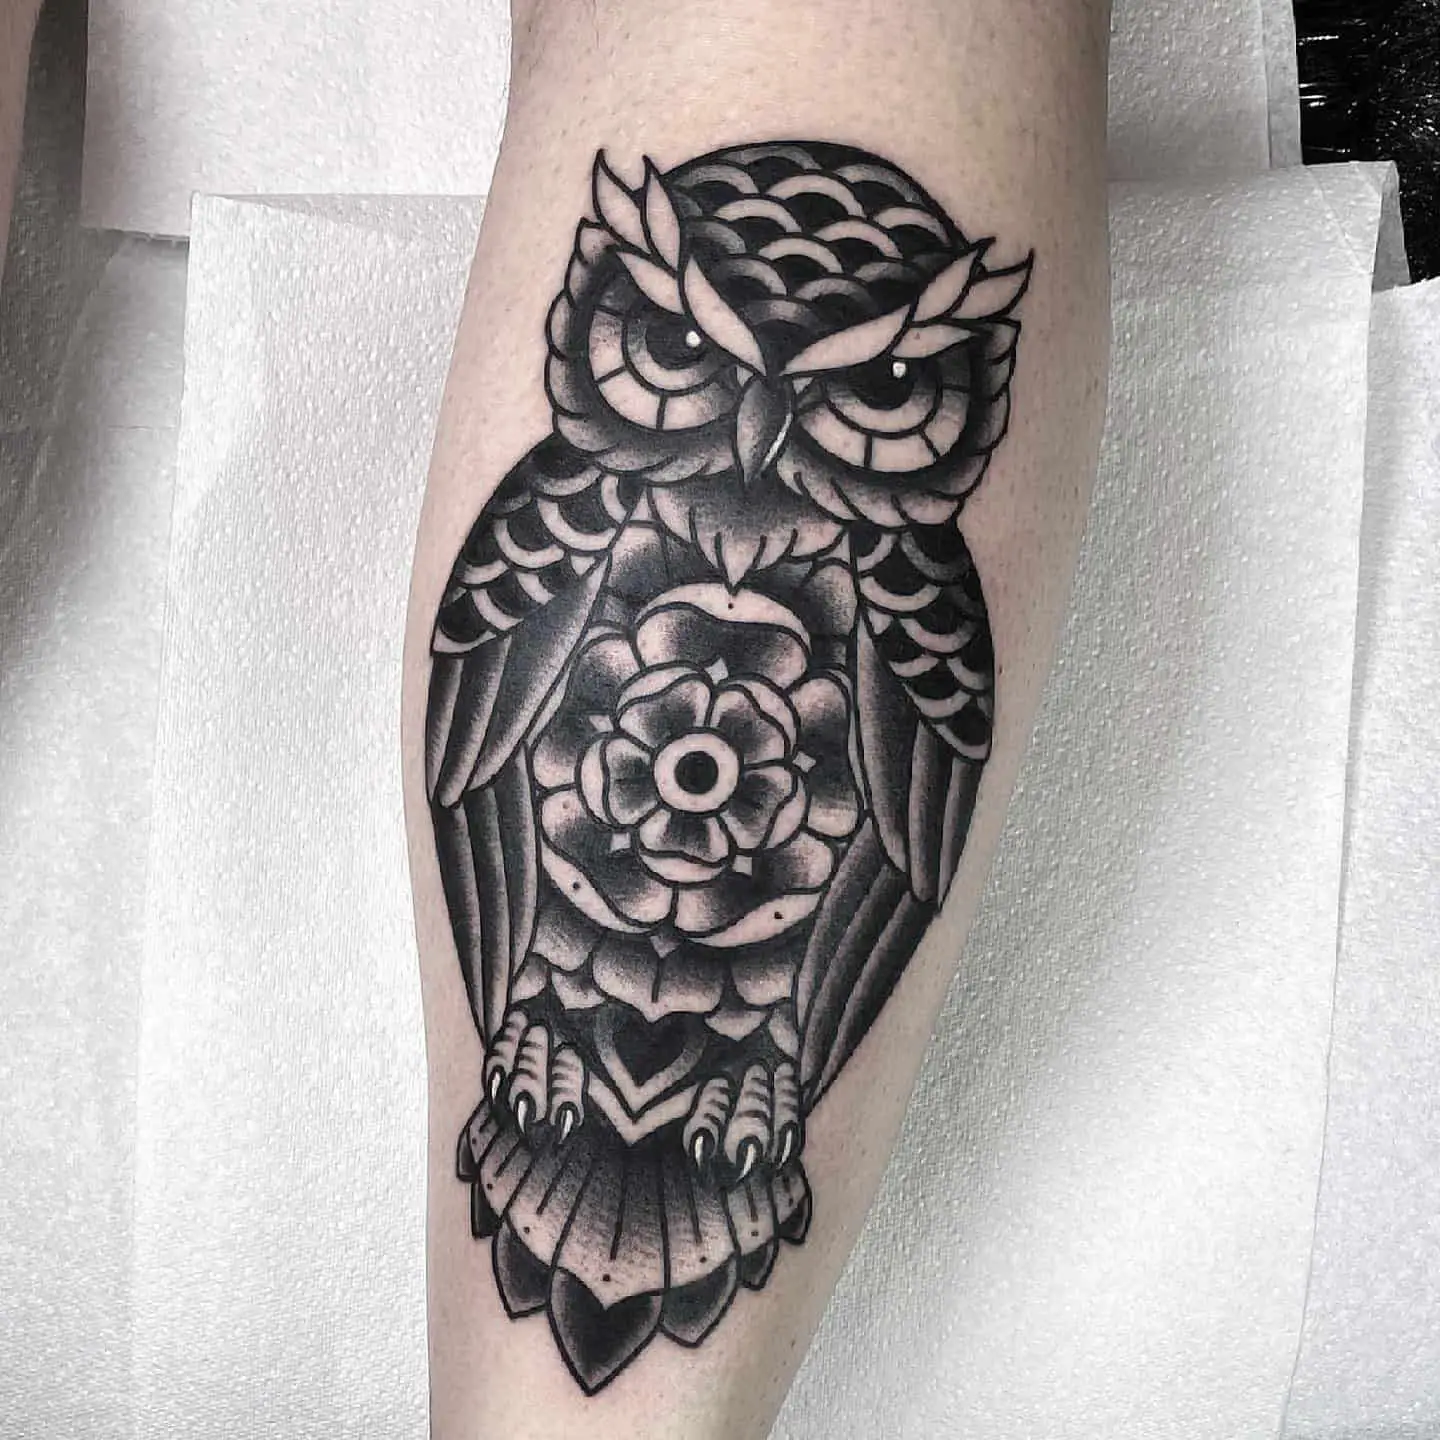 Owl Tribal Tattoo | Owls have always been one of my favorite… | Flickr